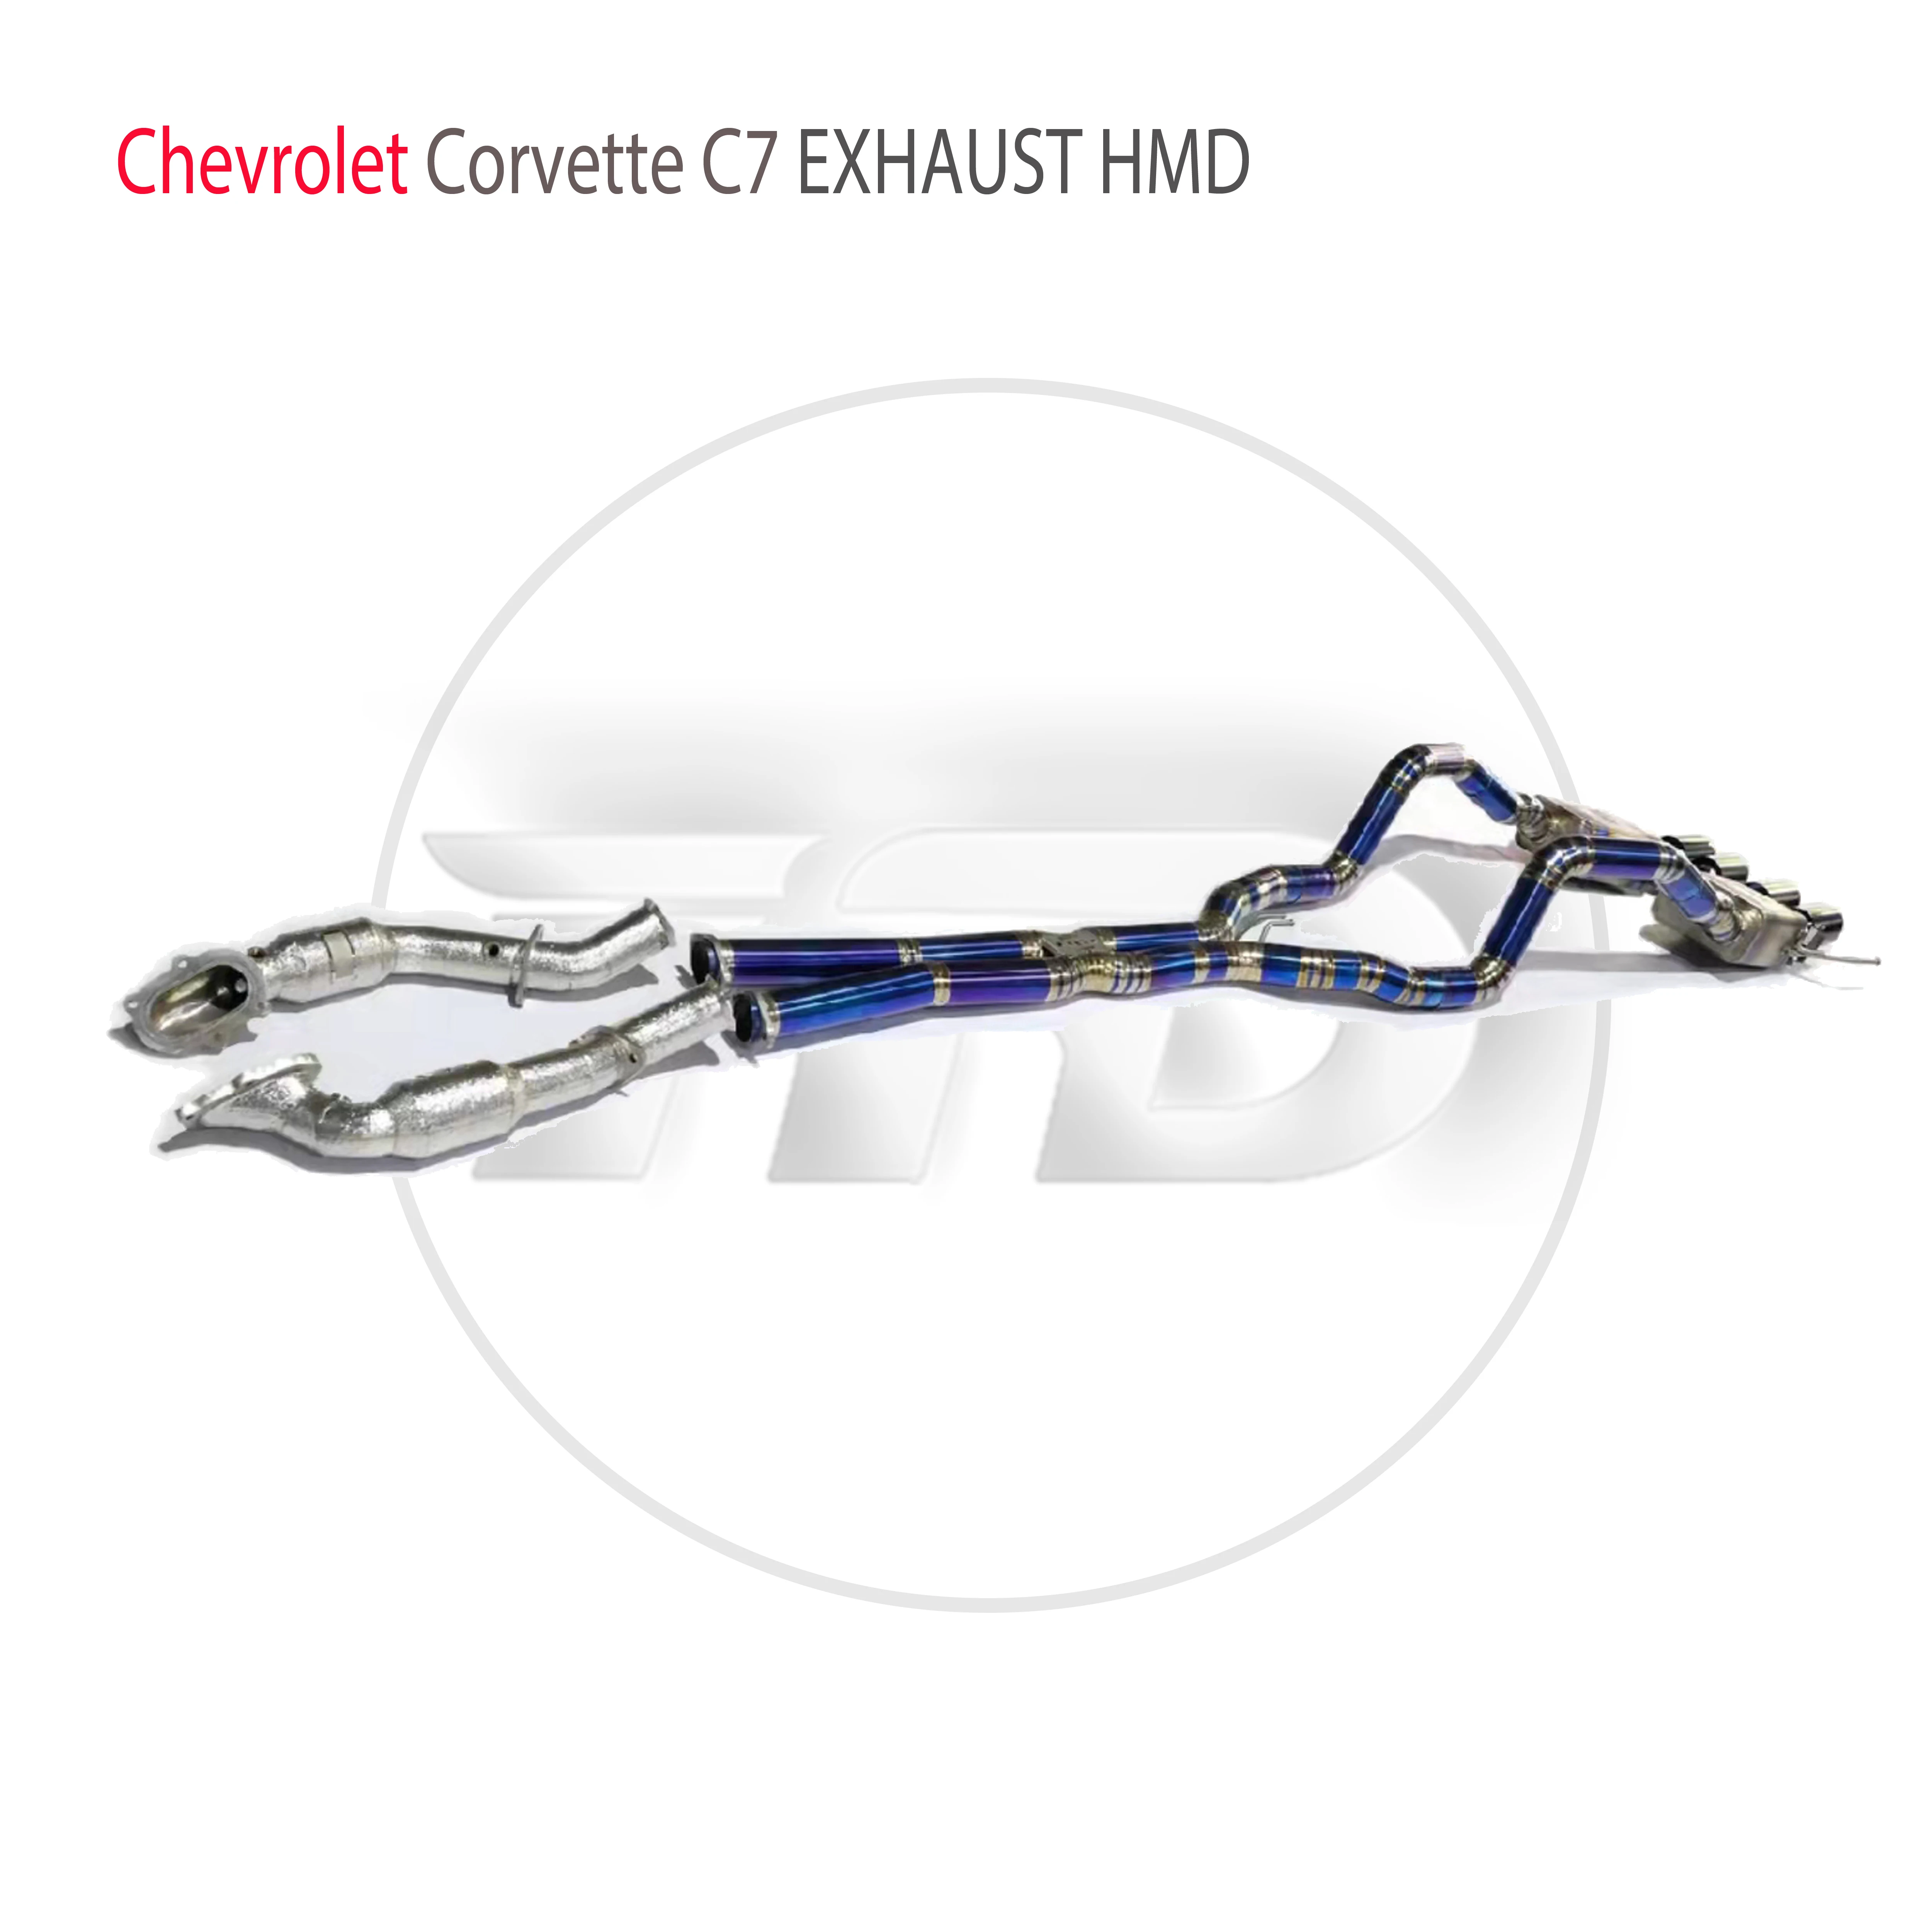 

HMD Titanium Alloy Exhaust System Performance Downpipe And Valve Catback is Suitable For Chevrolet Corvette C7 Muffler For Cars